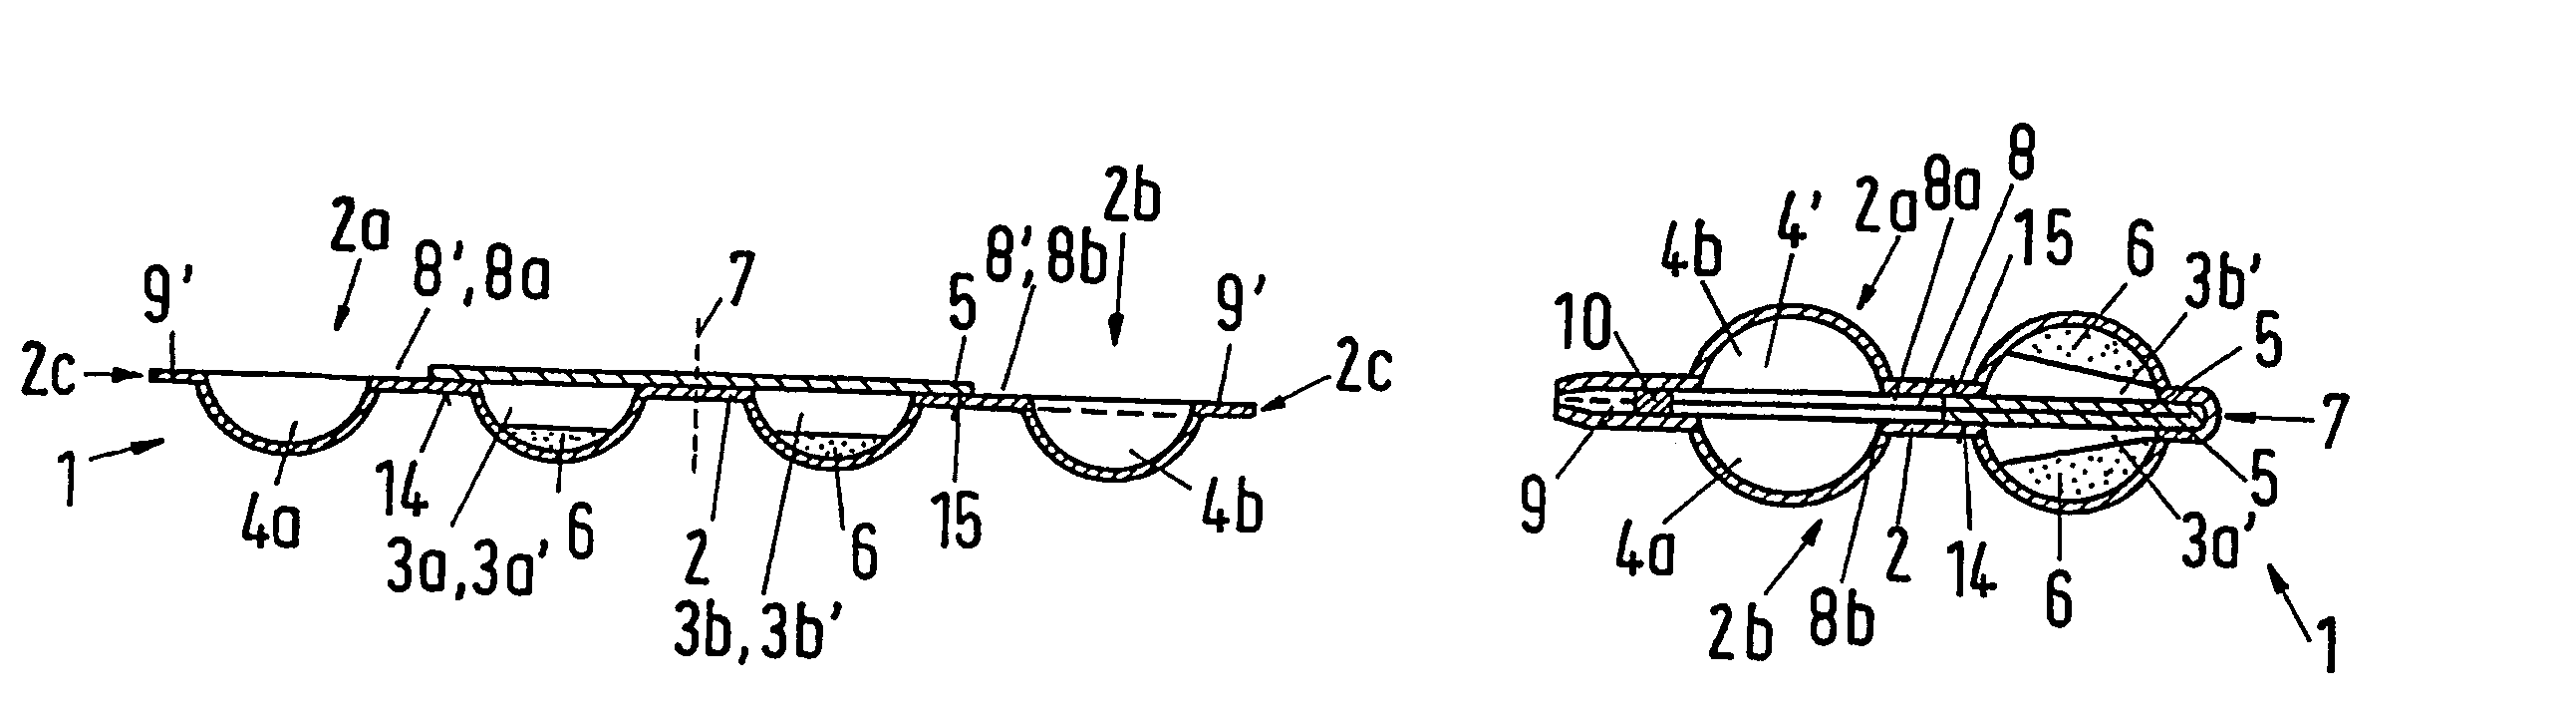 Device having sealed breakable chambers for storing and dispensing viscous substances